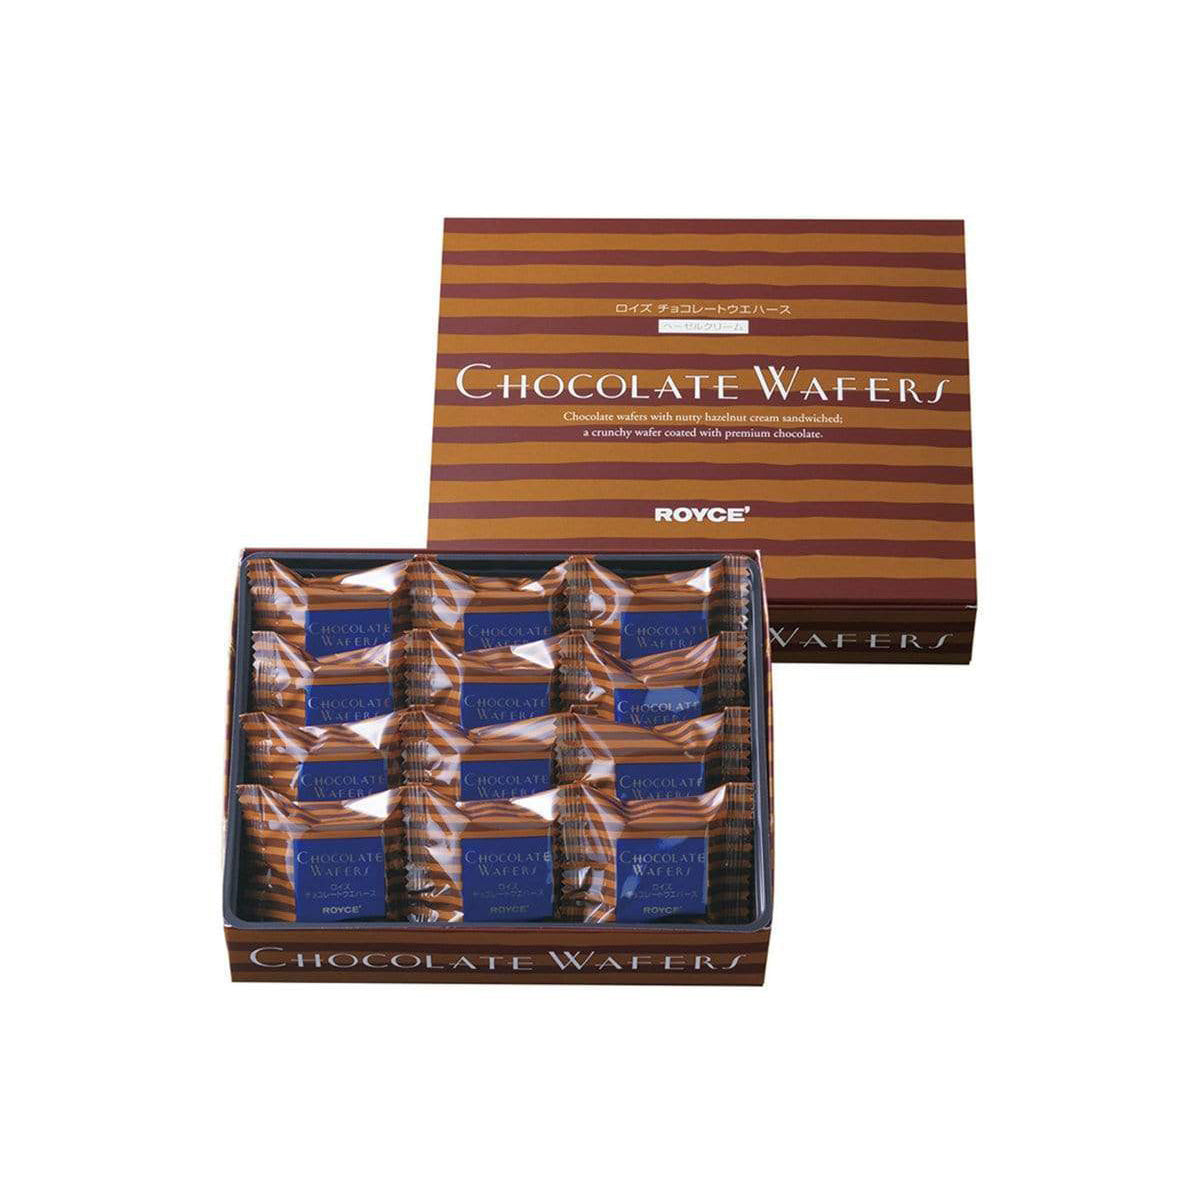 ROYCE' Chocolate - Chocolate Wafers "Hazel Cream" - Image shows a brown striped box. White text in the center says Chocolate Wafers Chocolate wafers with nutty hazelnut cream sandwiched; a crunchy wafer coated with premium chocolate. ROYCE'. Text on the bottom part says Chocolate Wafers. Image shows a brown box filled with individually-wrapped wafers with brown striped packaging. Blue text on each says Chocolate Wafers ROYCE'. White text on the bottom part says Chocolate Wafers.